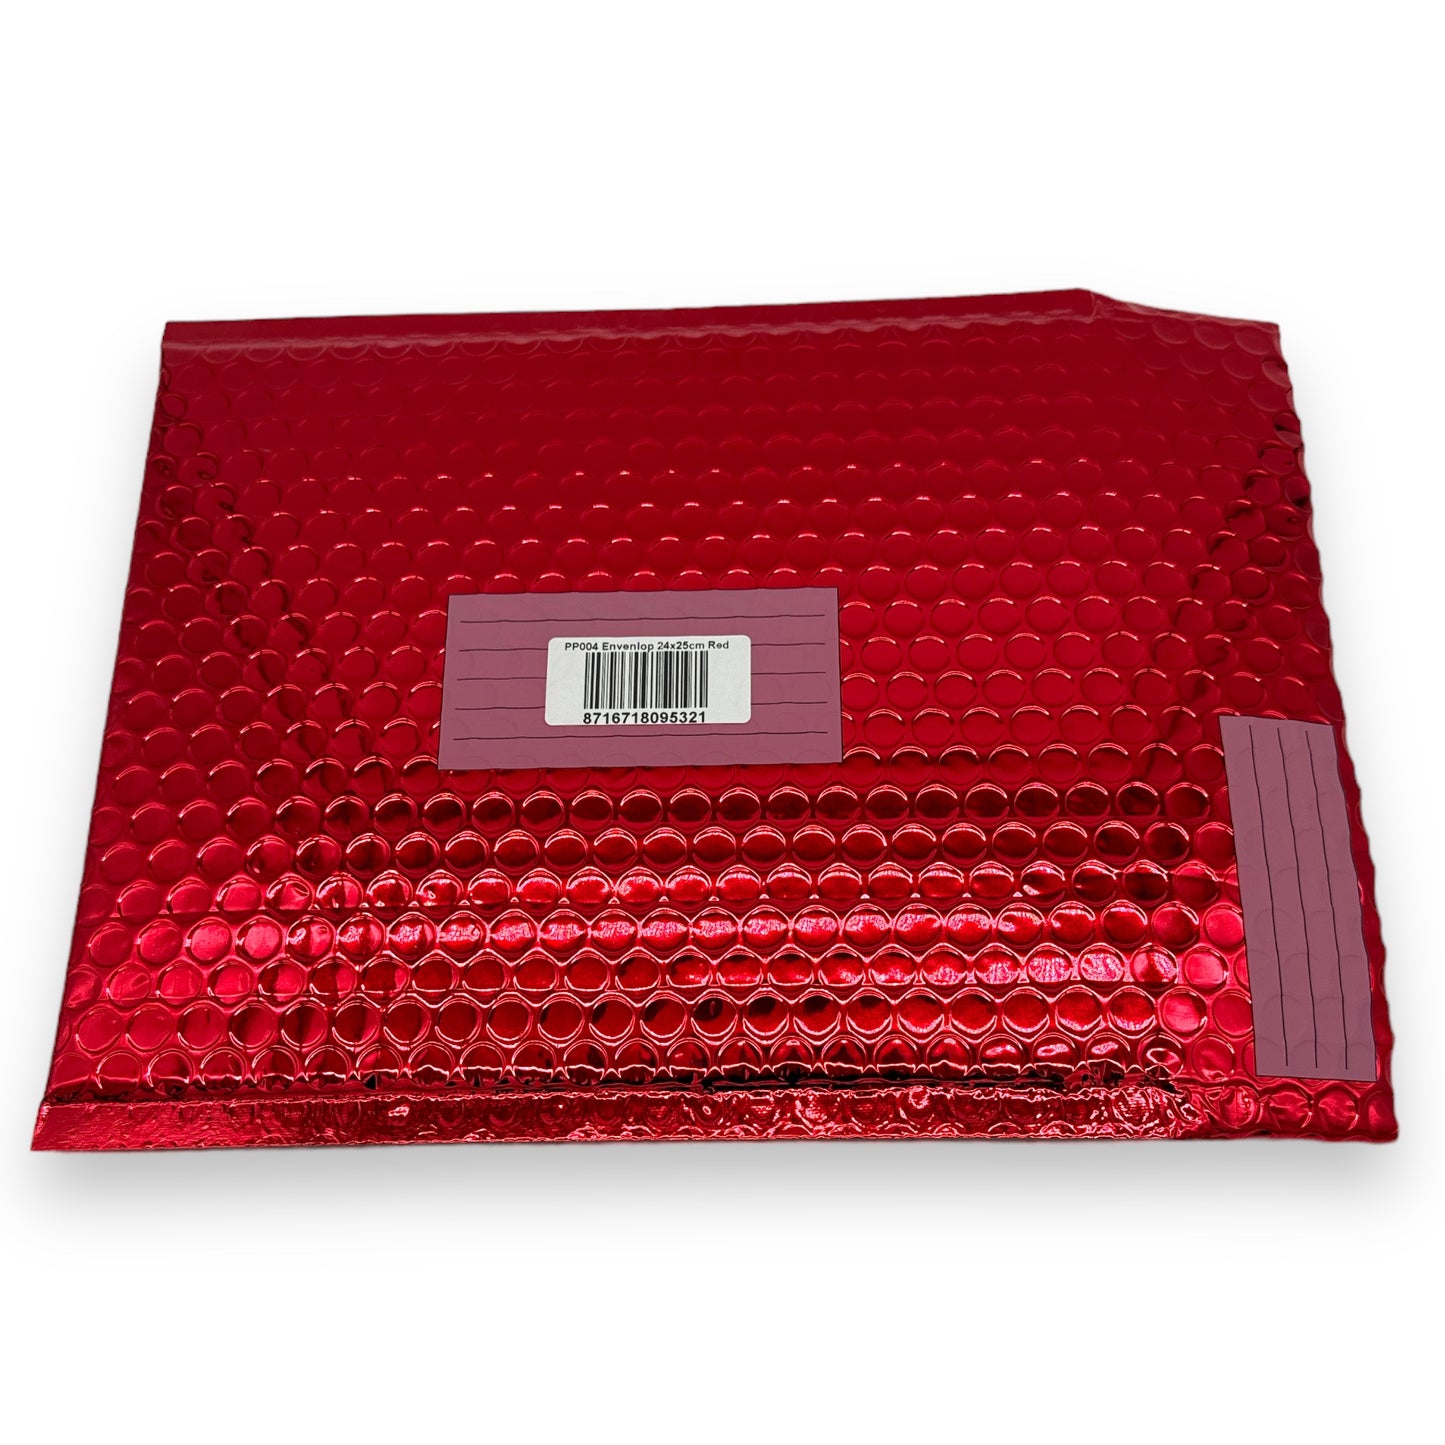 Timmy Toys - PP004 - Metallic Glossy Bubble Envelop - 24X25cm - Red - 1 Piece